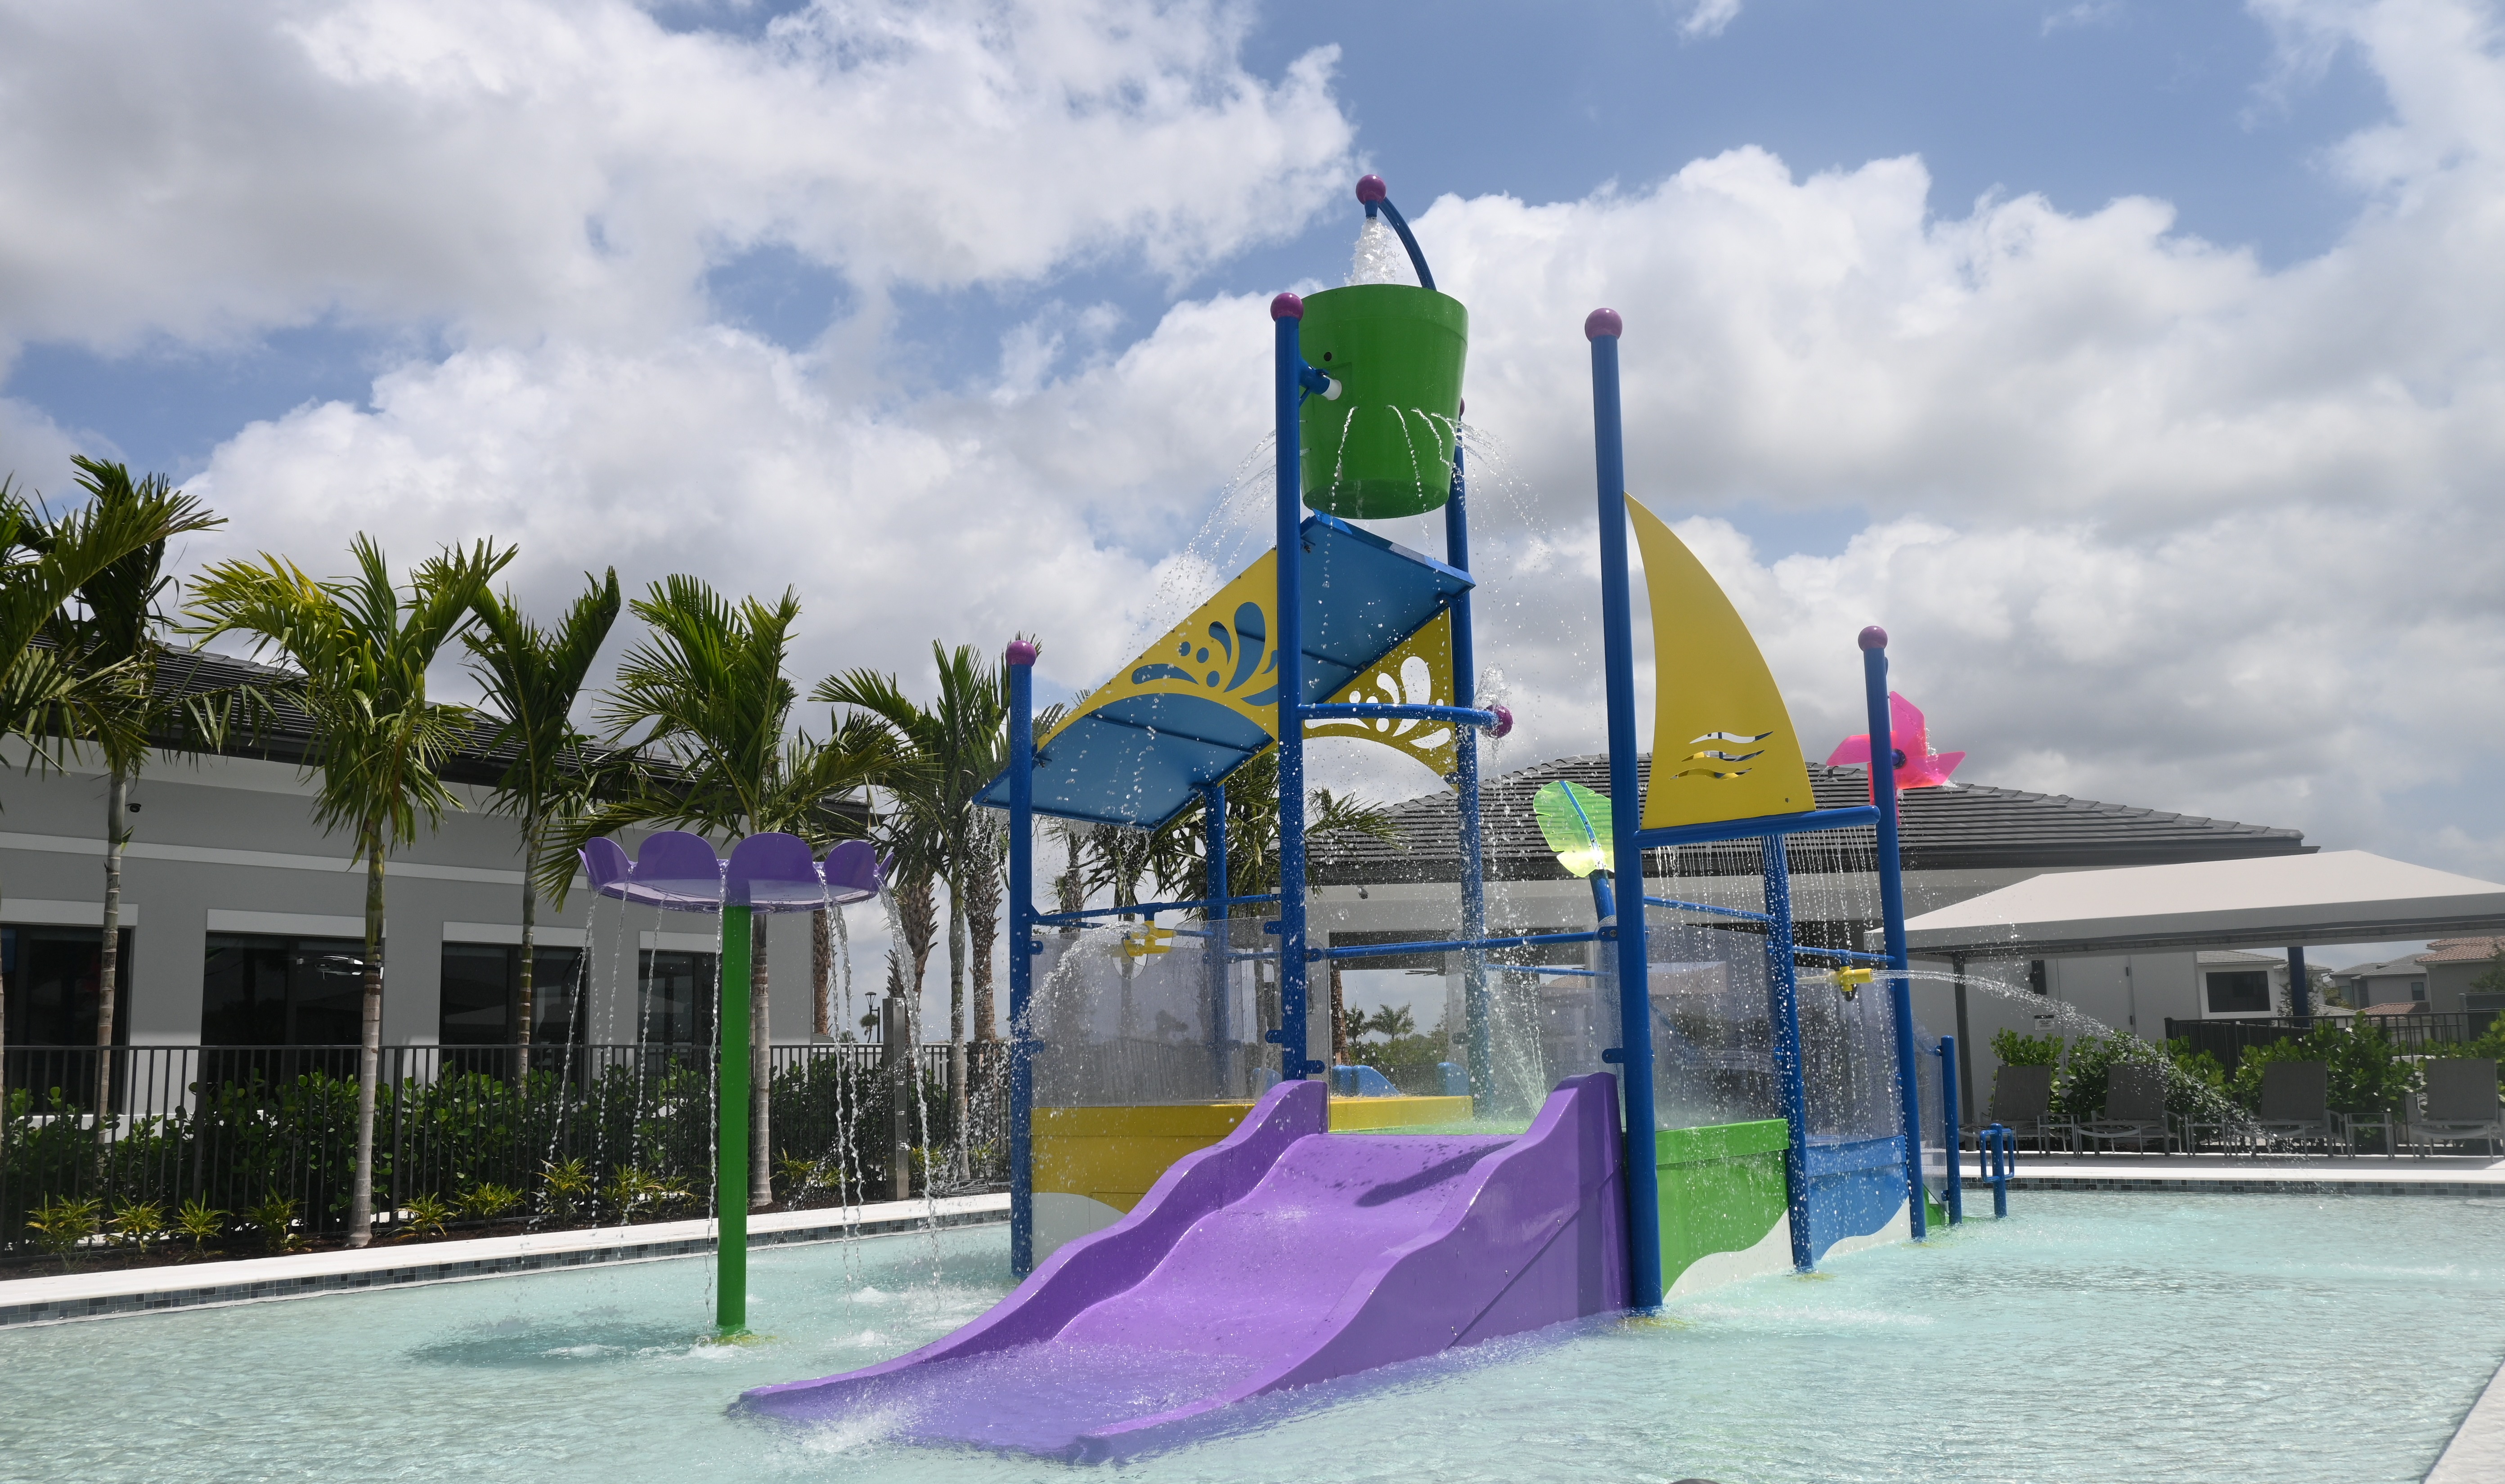 The SlideWorx Kiddie Slide customized to include an entire play structure with dumping buckets and spraying water